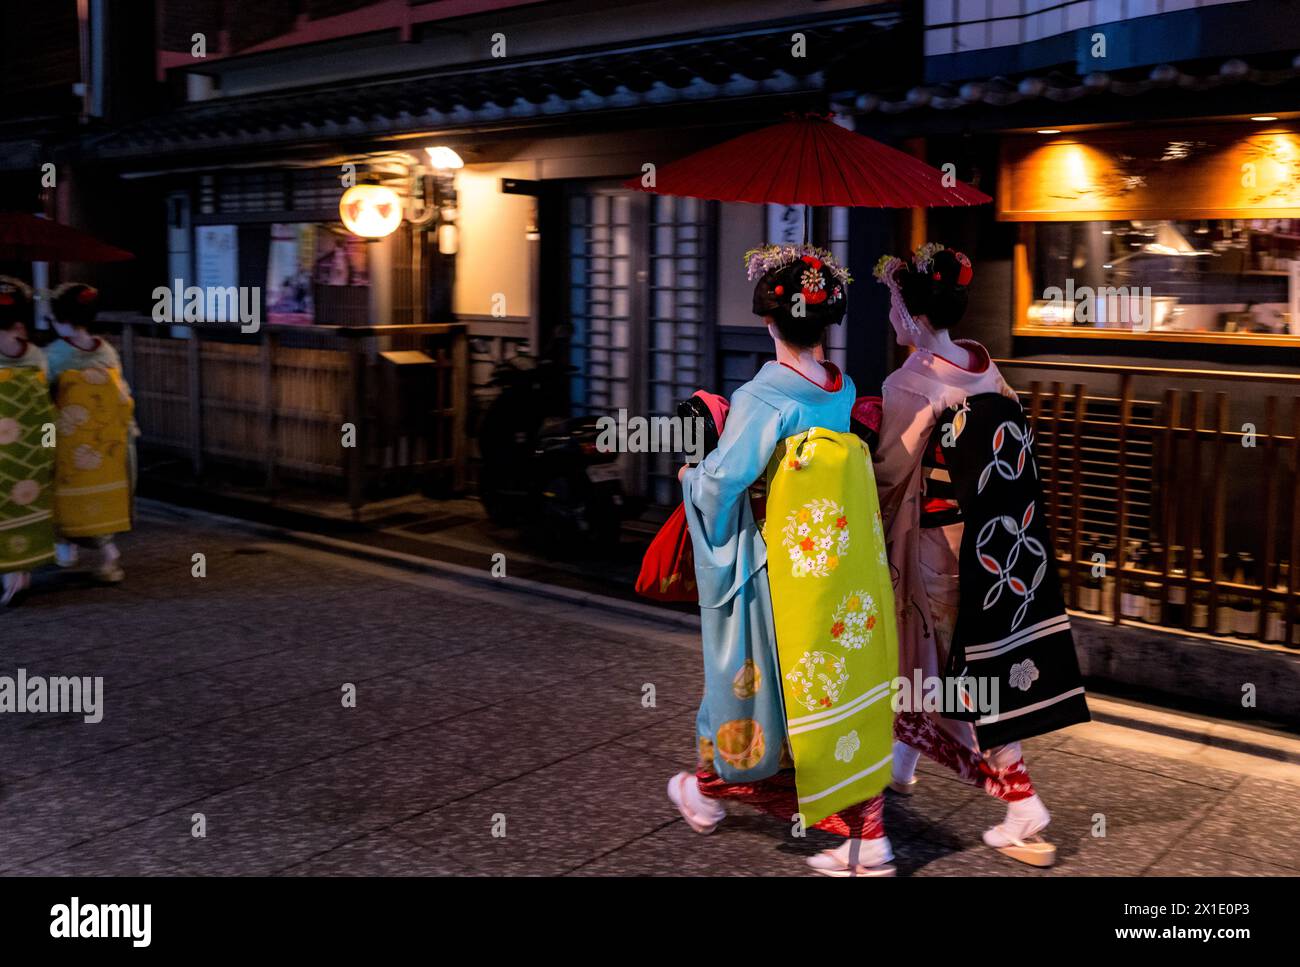 Japan - Geishas walk home in the evening in Kyoto's entertainment district wearing traditional kimonos Stock Photo